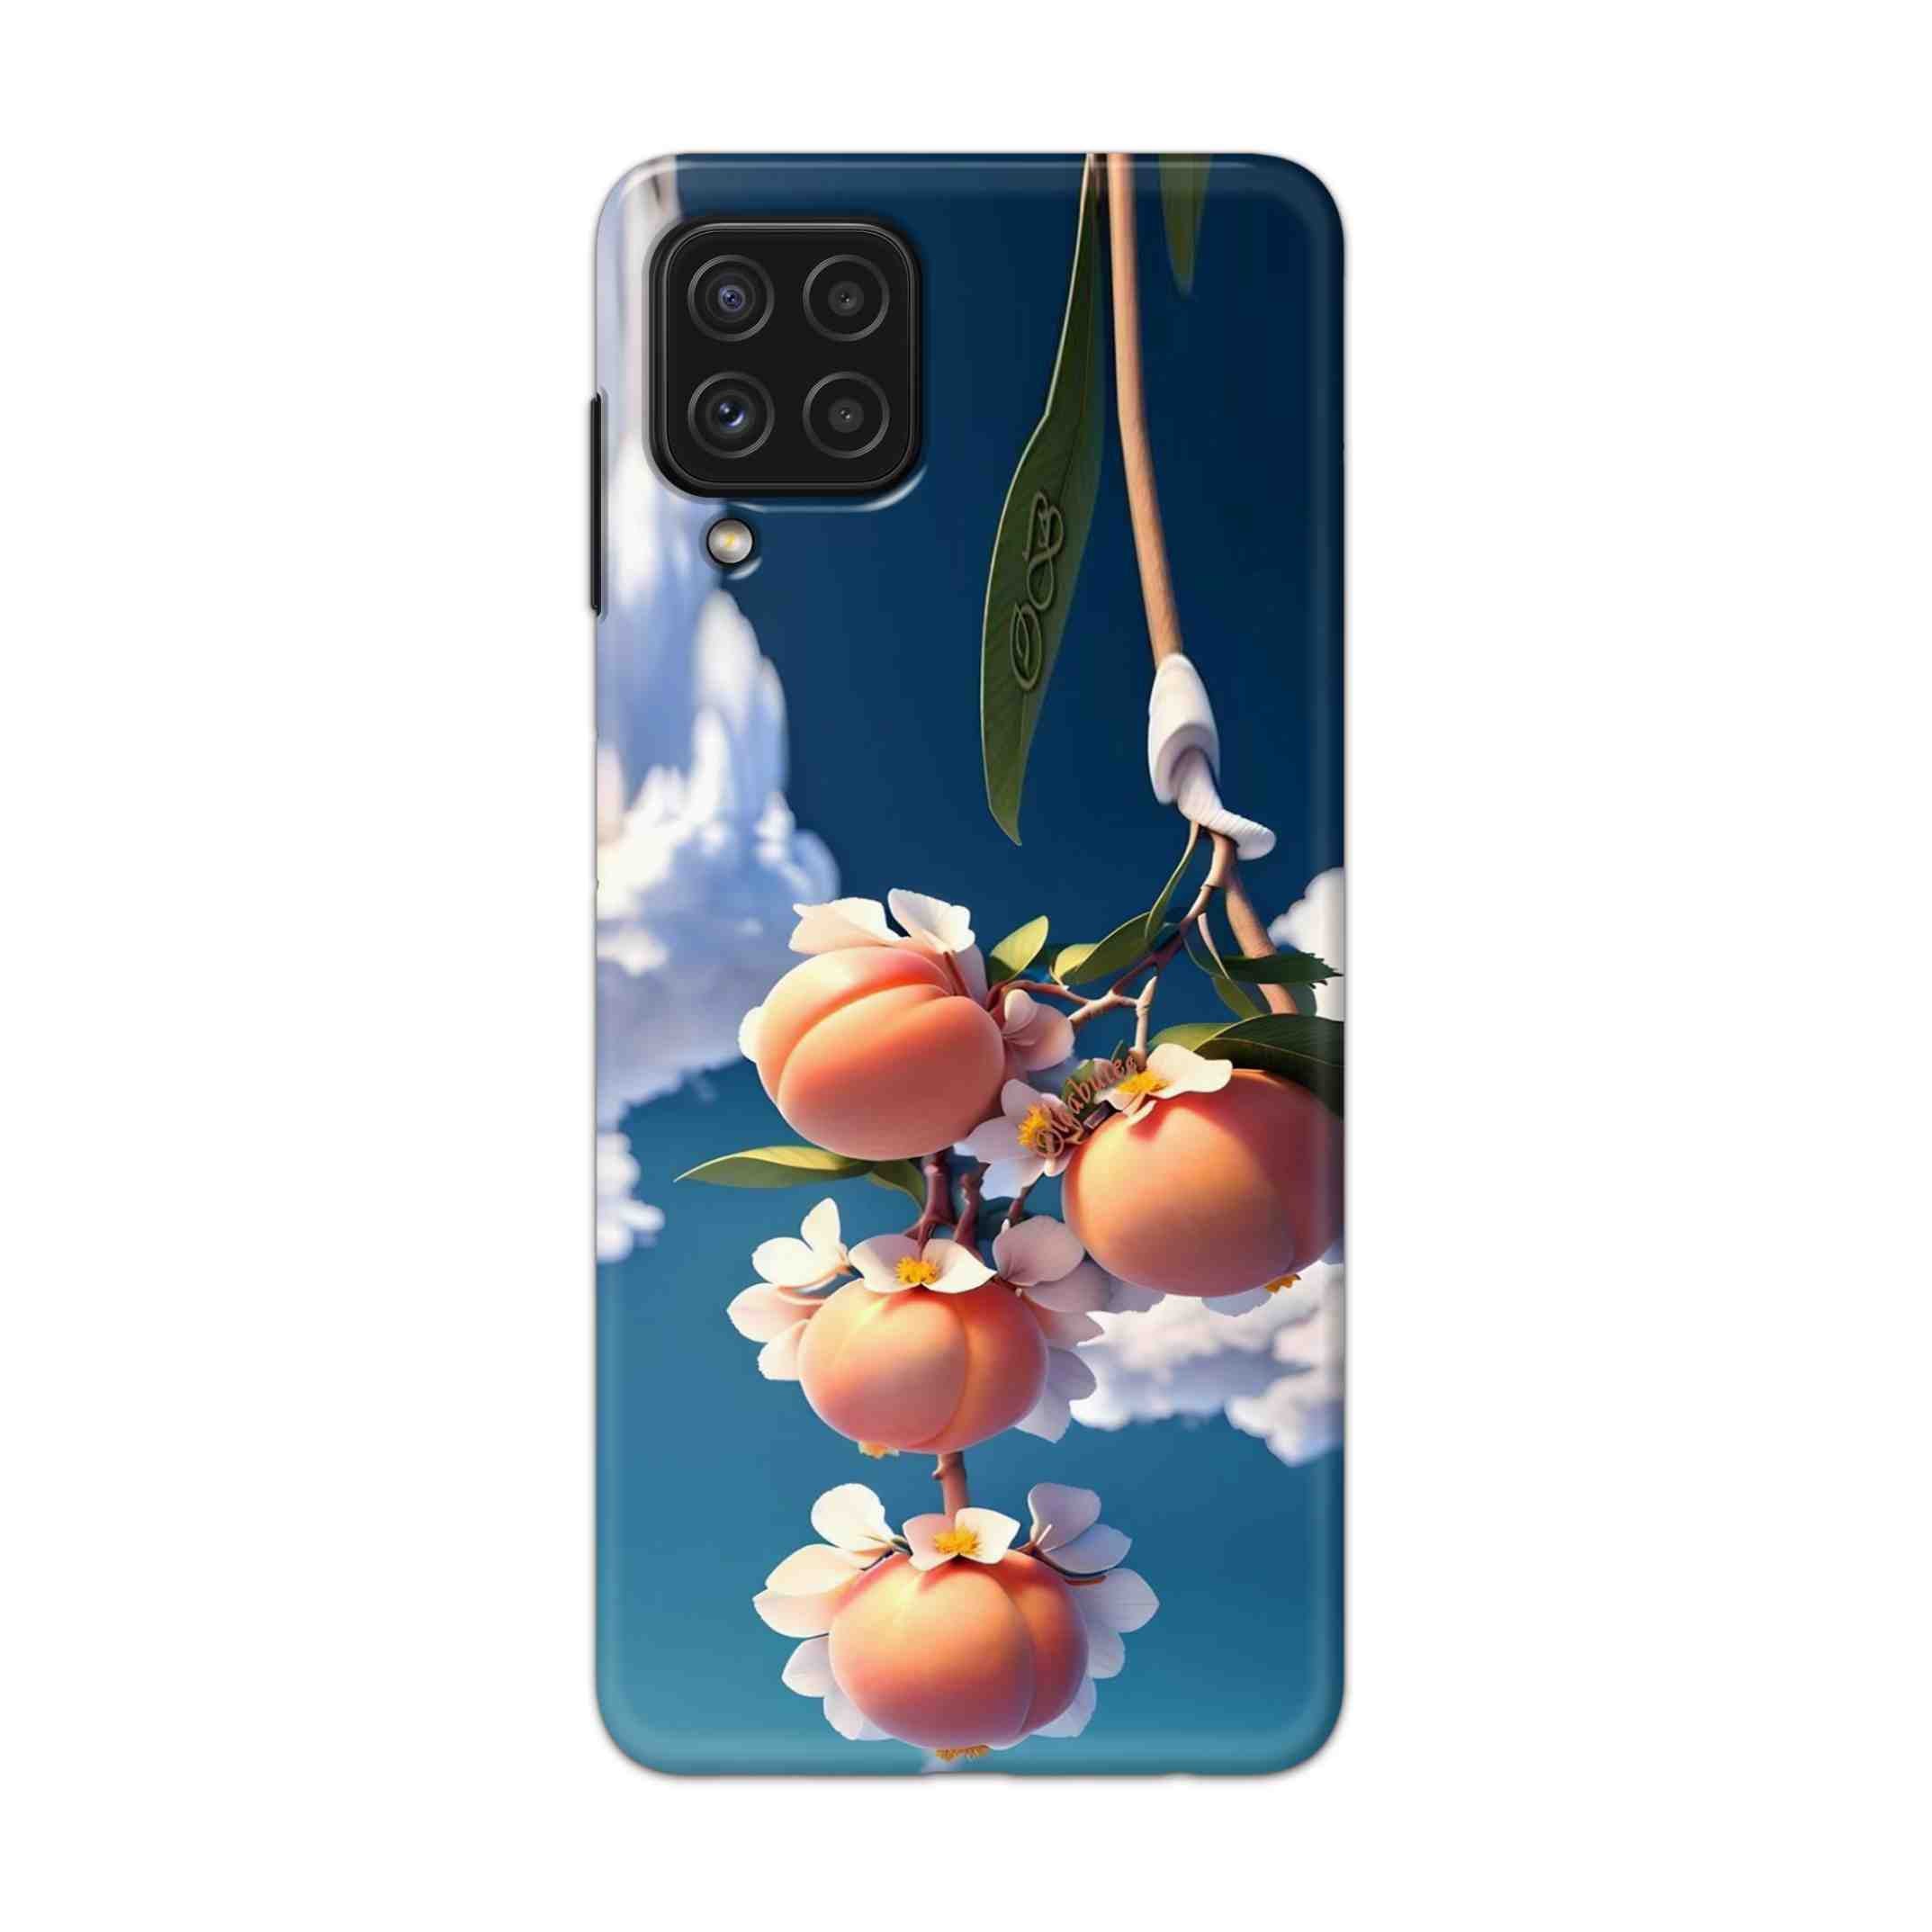 Buy Fruit Hard Back Mobile Phone Case Cover For Samsung Galaxy A22 Online